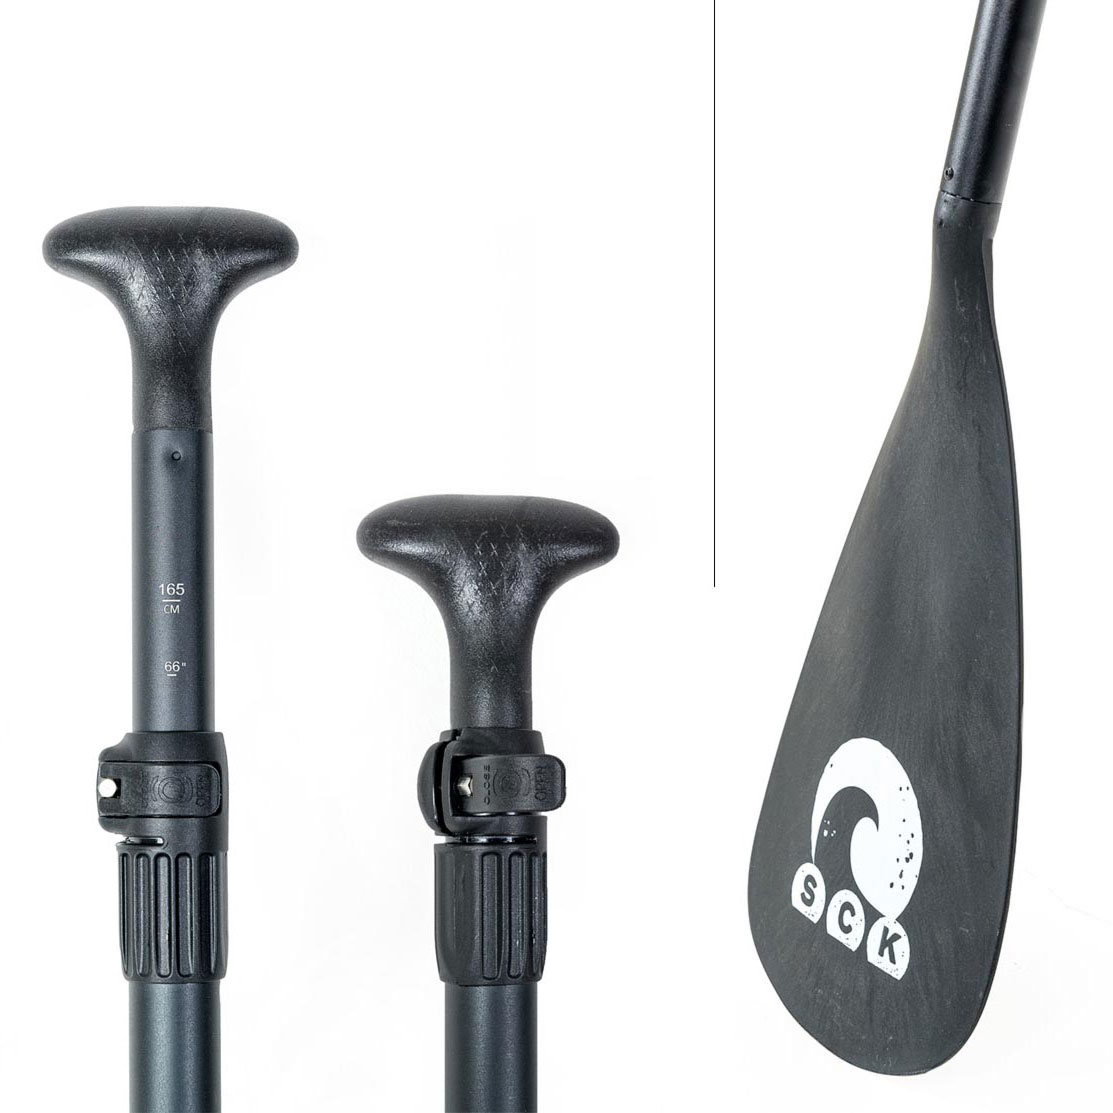 Paddle included in the inflatable SUP package